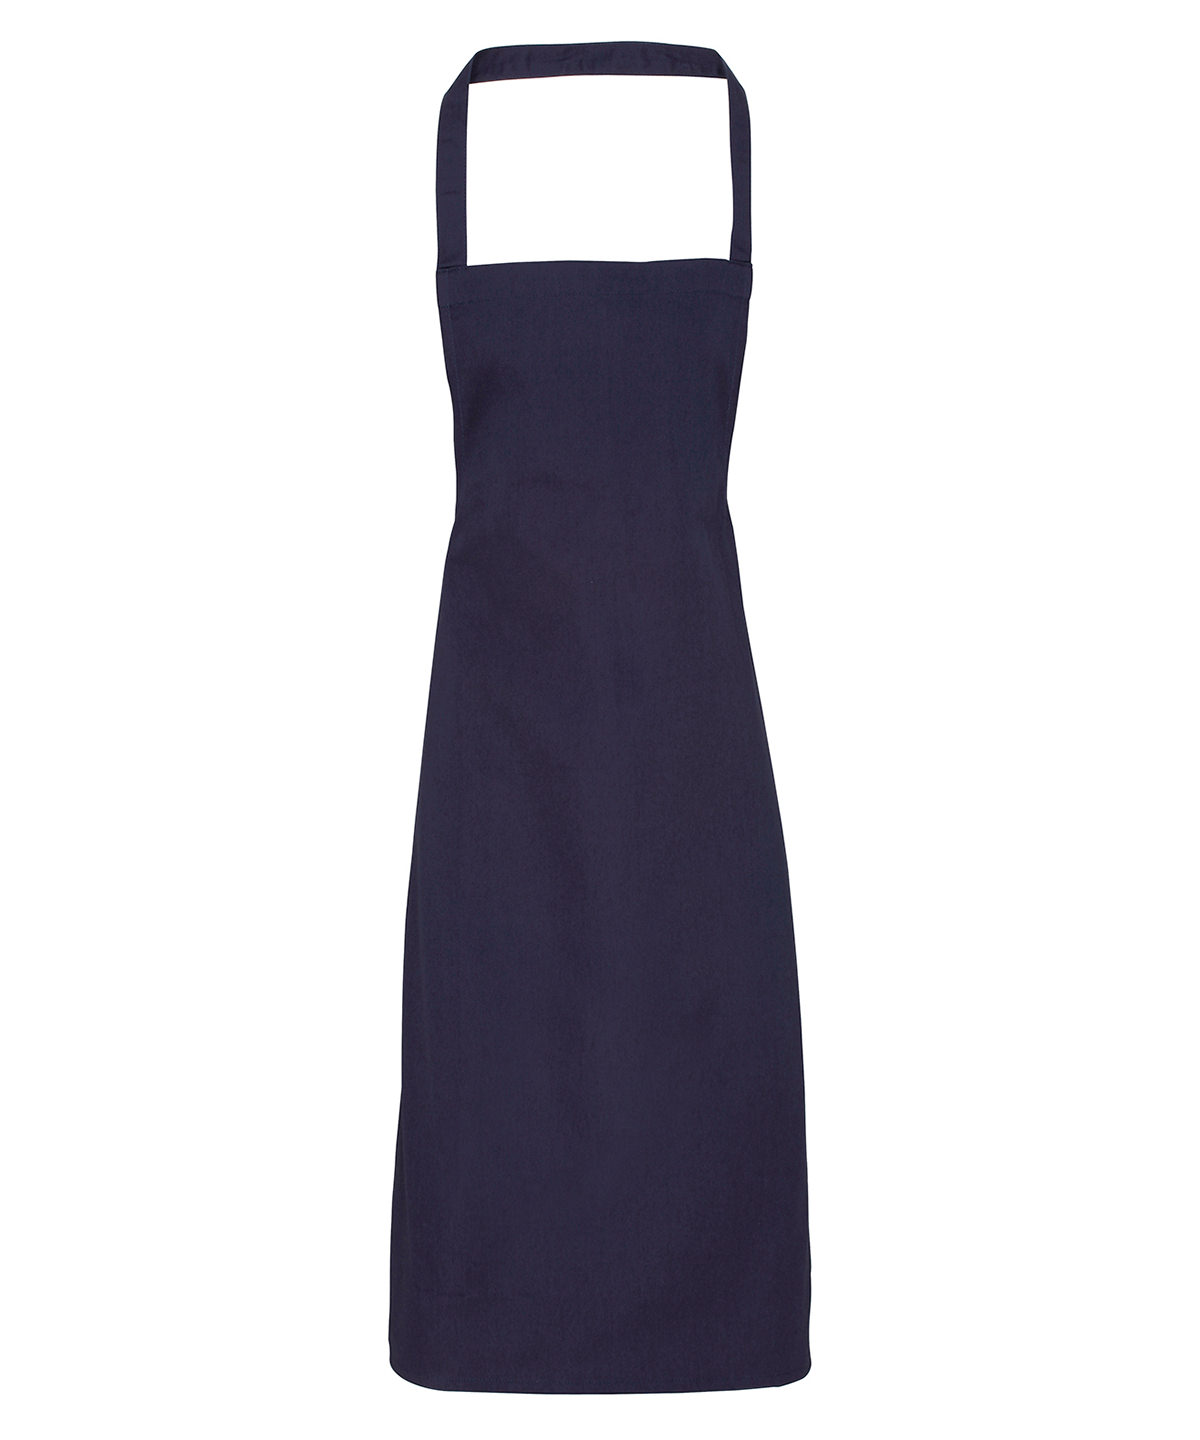 100% Cotton Apron - Organic Certified Navy Size One Size